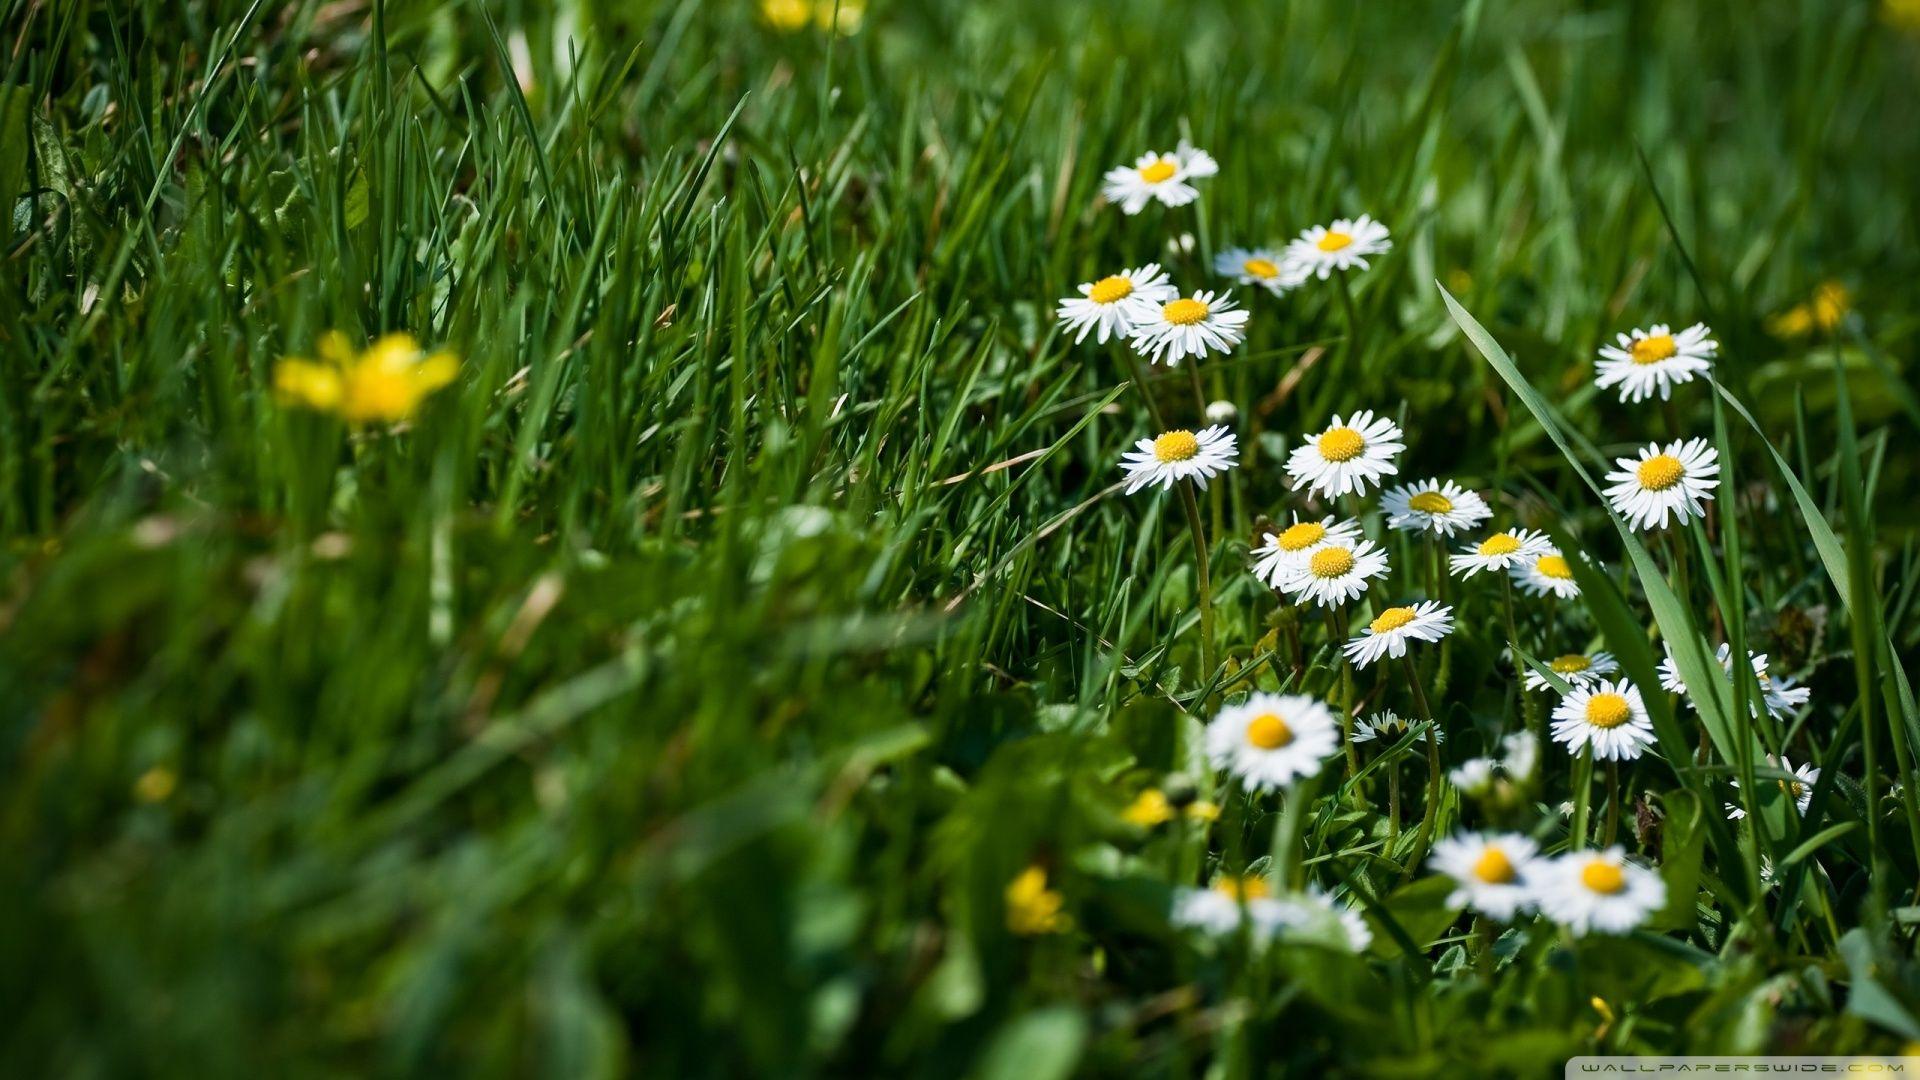 Grass and Flowers Wallpapers - Top Free Grass and Flowers Backgrounds